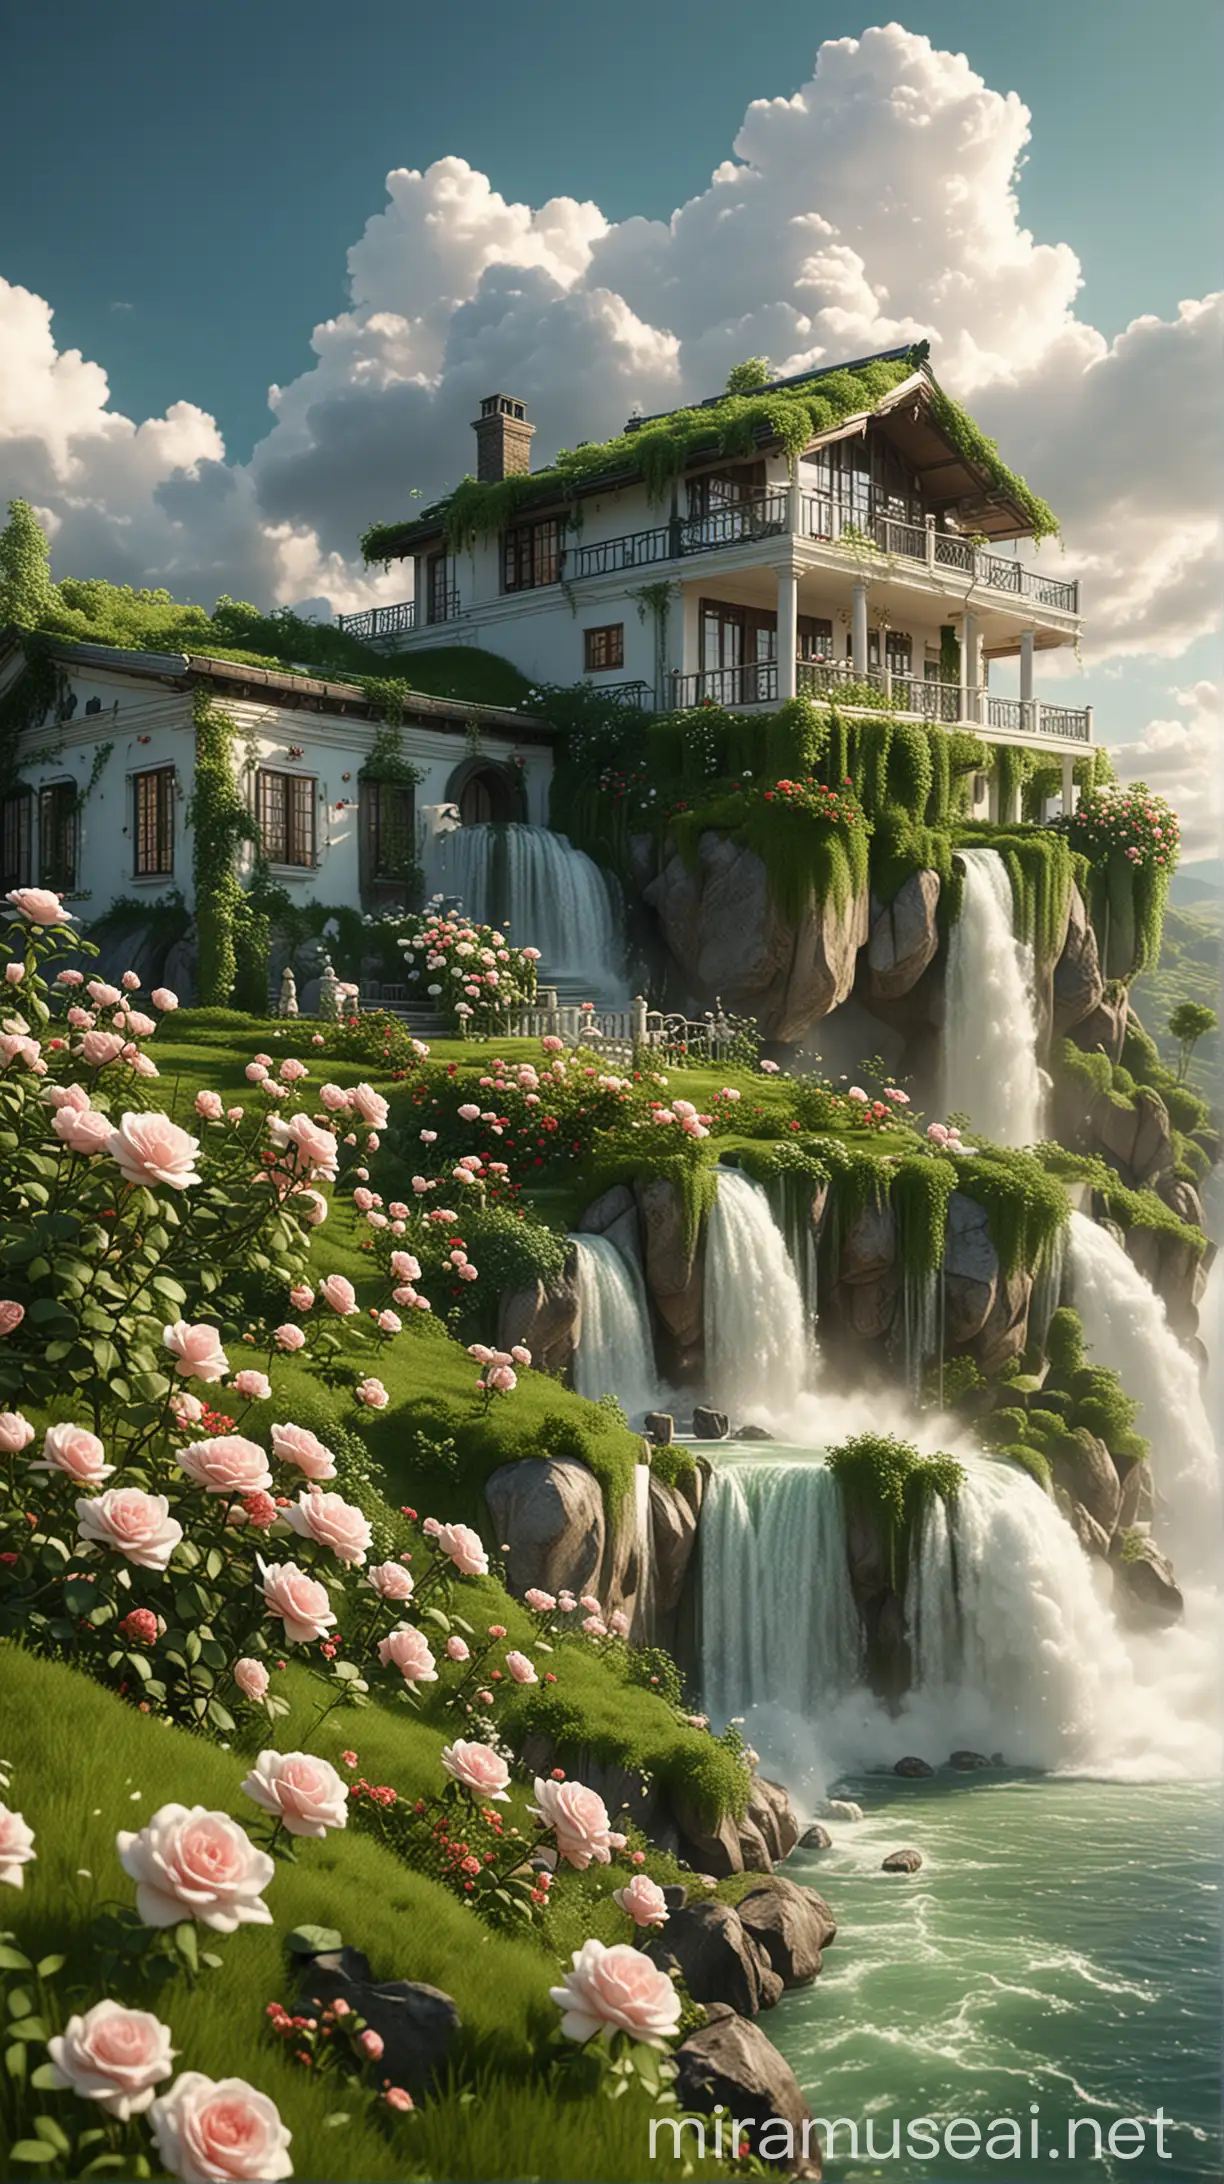 A realistic CG rendering of Juck Zhang, with a green villa on it, green grass besides the villa, a white cotton cloud in the sky, and a rose waterfall flowing from the roof to the grass.HD